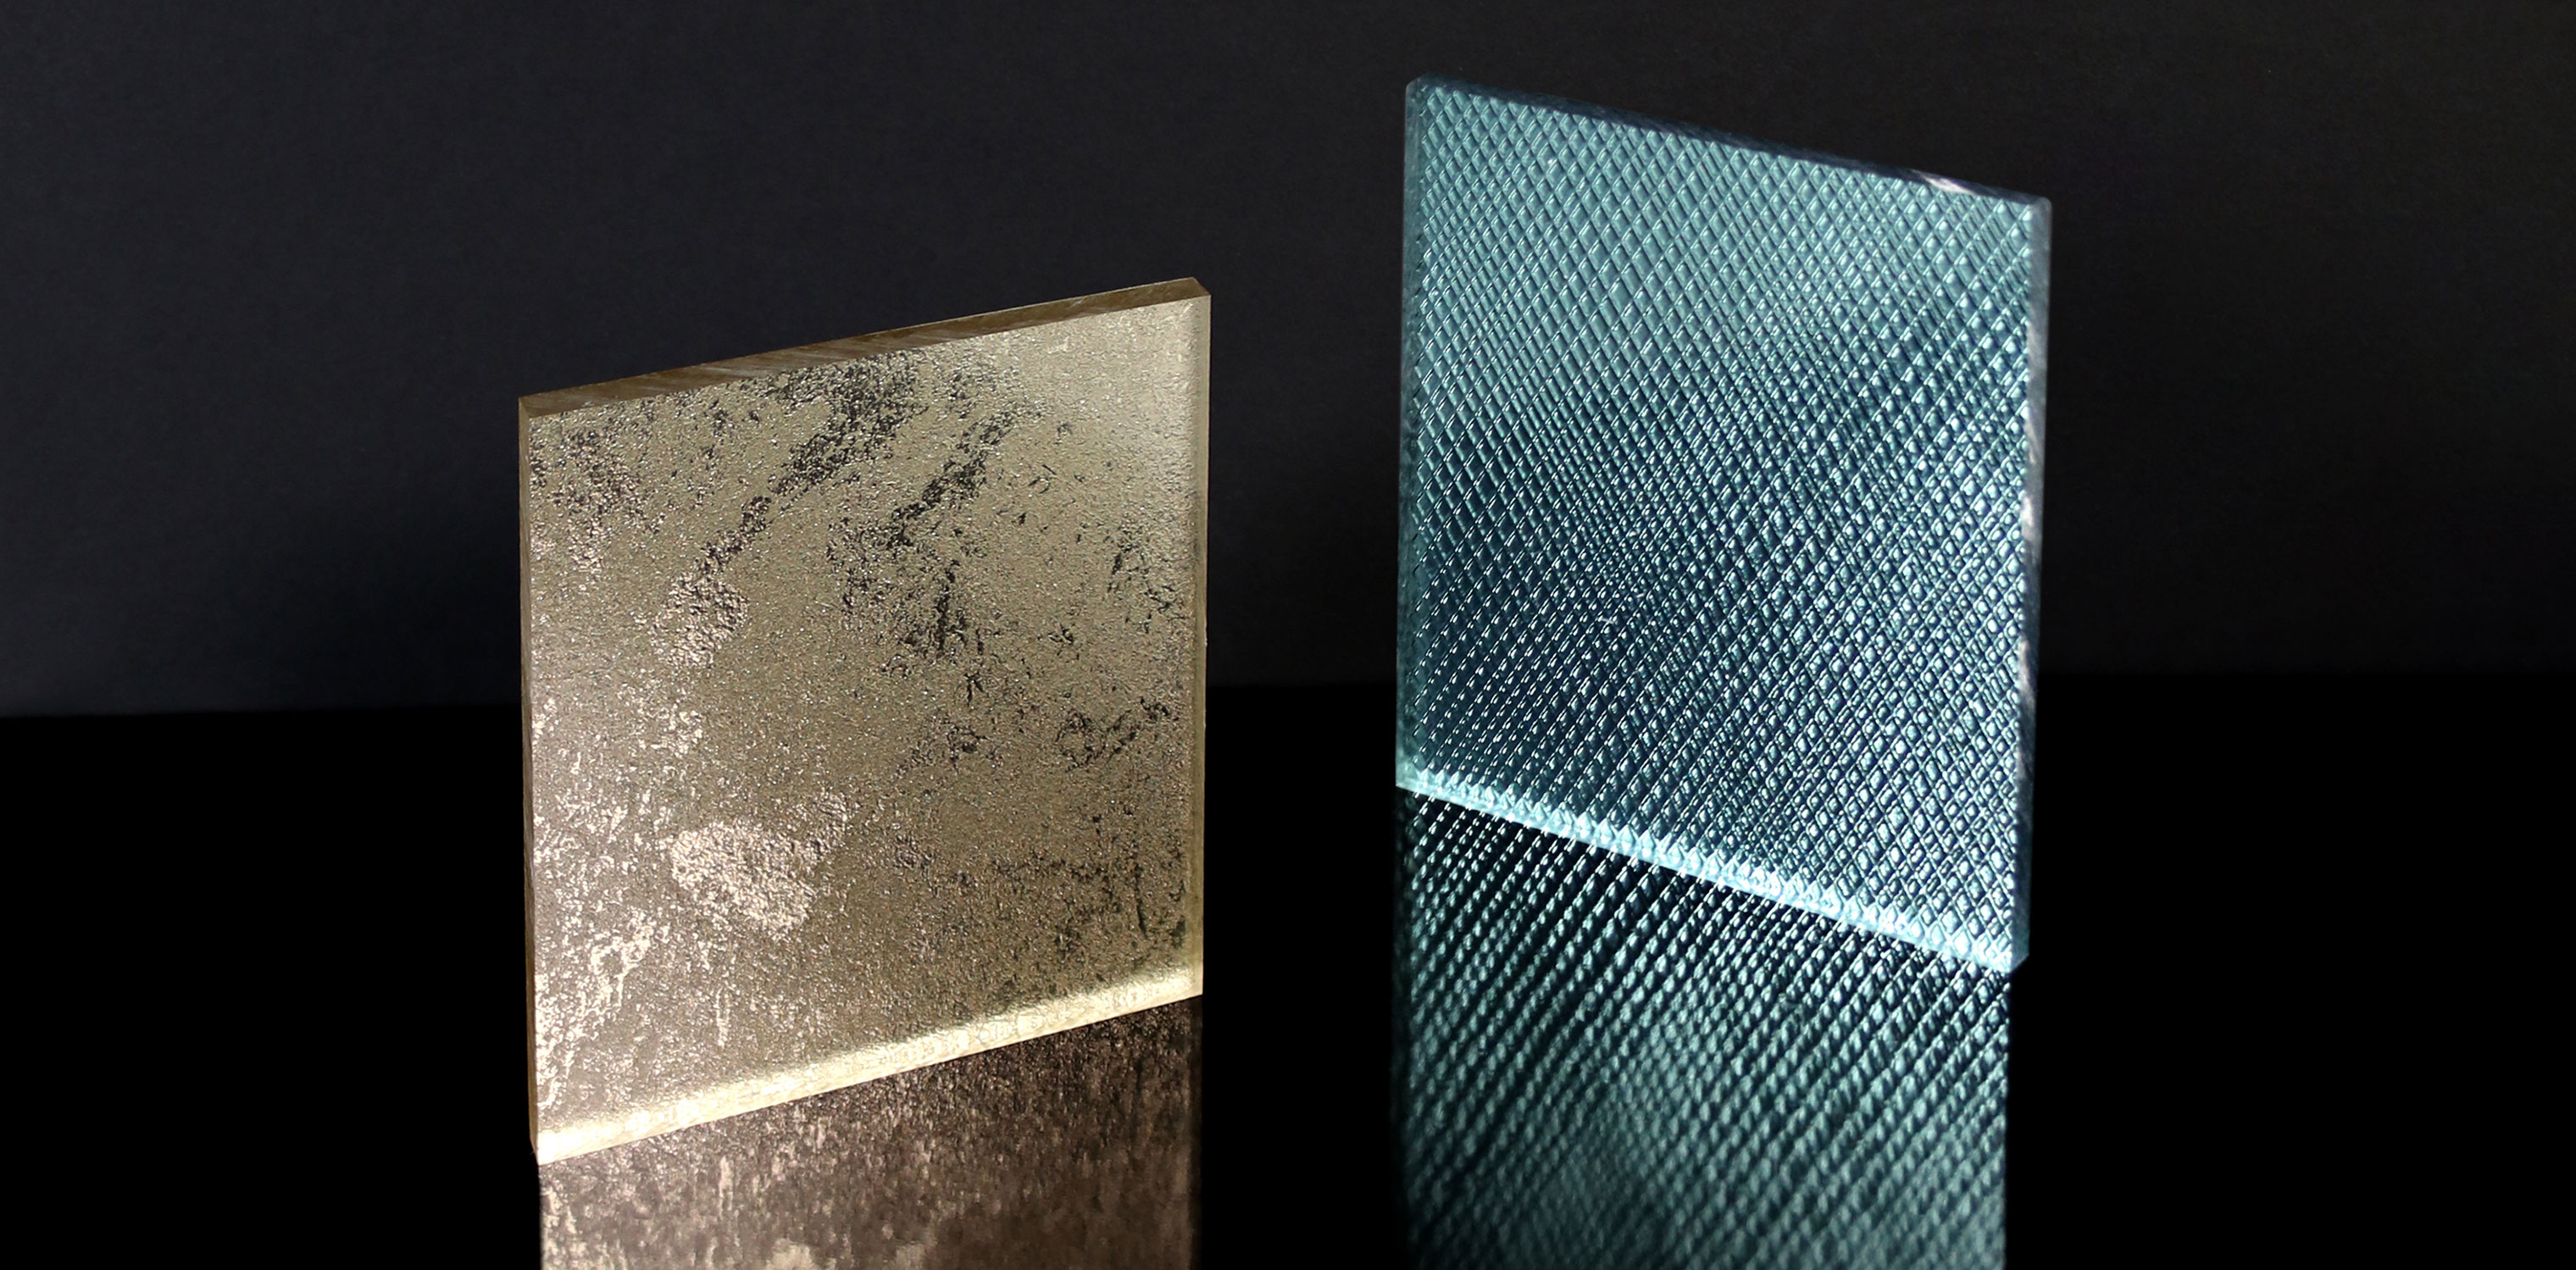 Two square Resin Panel samples, one gold and one turquoise, stand on a reflective surface.